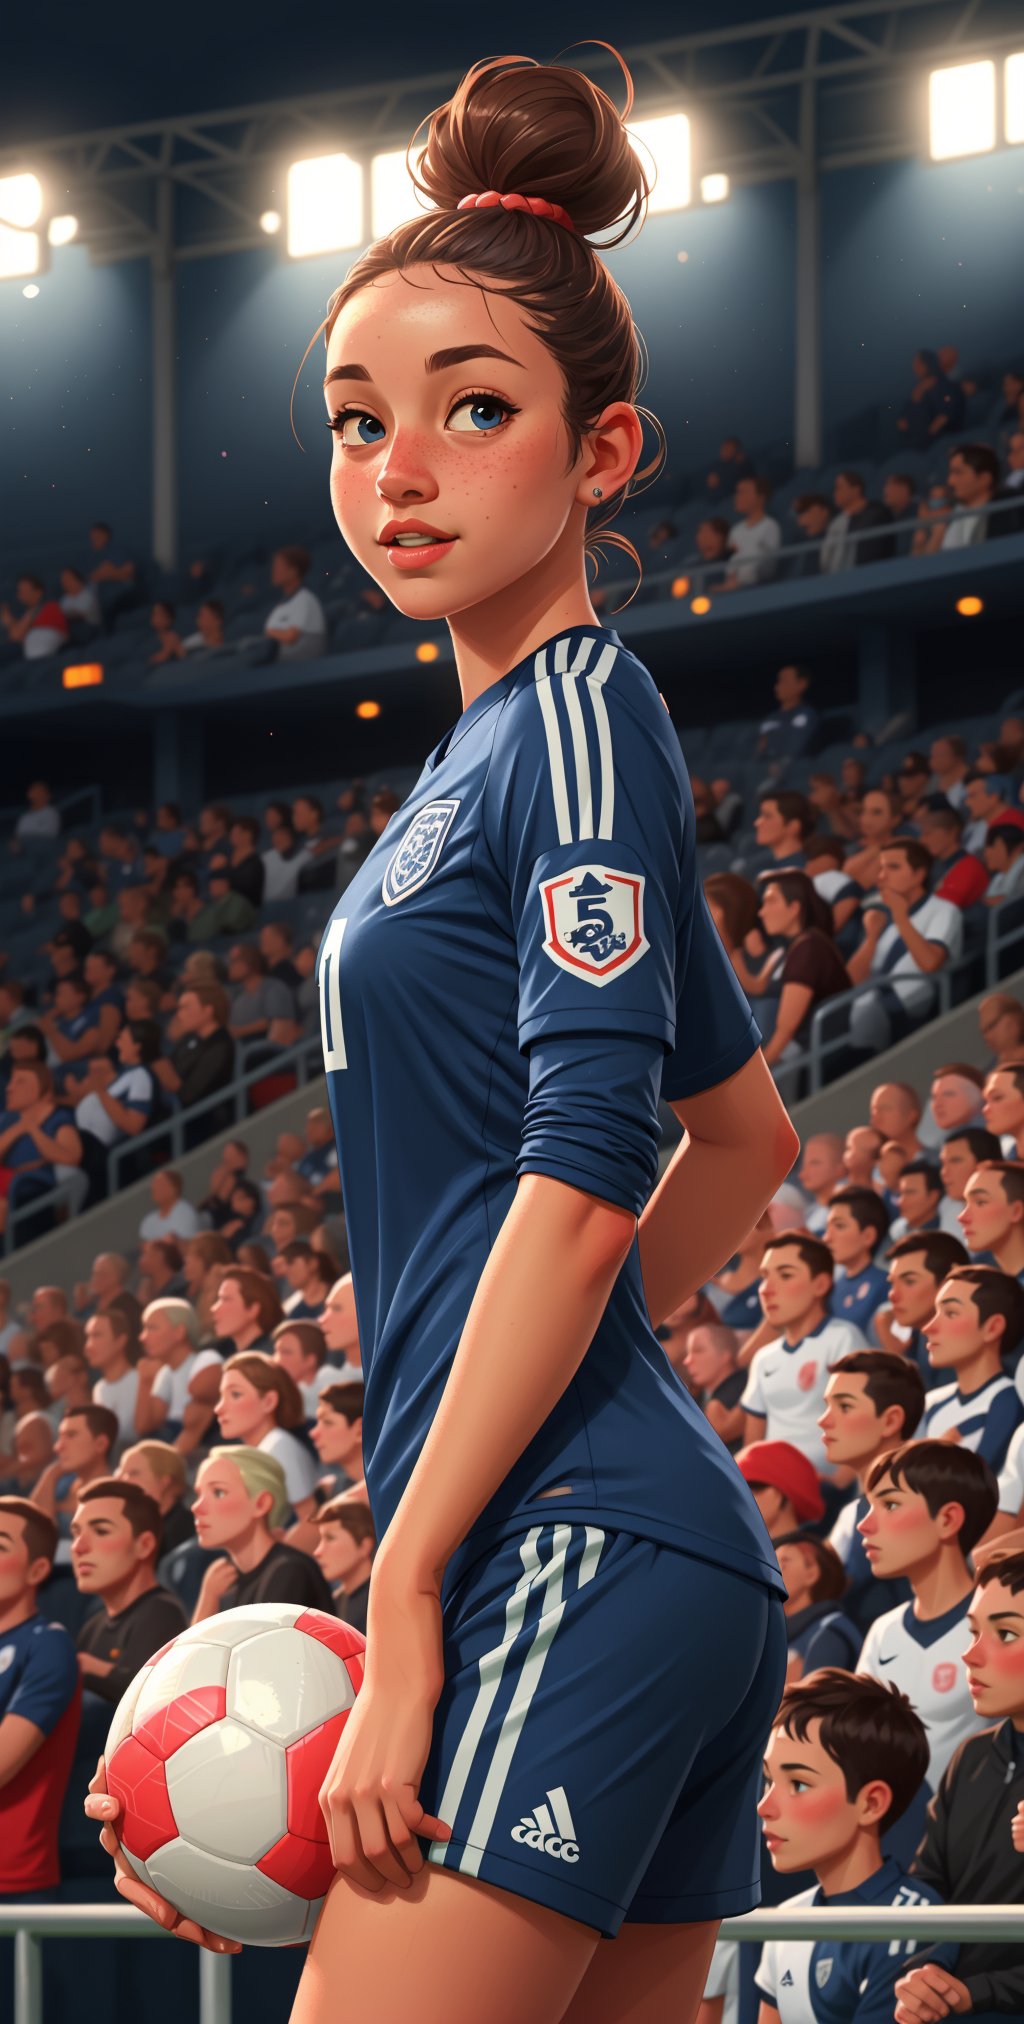 beautiful:1.2, (cute:1.3) (curvy:0.7), female soccer player in a crowded stadium, soccer ball, (smiling:0.7), detailed skin, (realistic skin:1.2), (freckles:0.9), blue eyes, full lips, broad cheek, masterpiece, ultra realistic, realistic light, (saturation), photorealistic, best quality, 